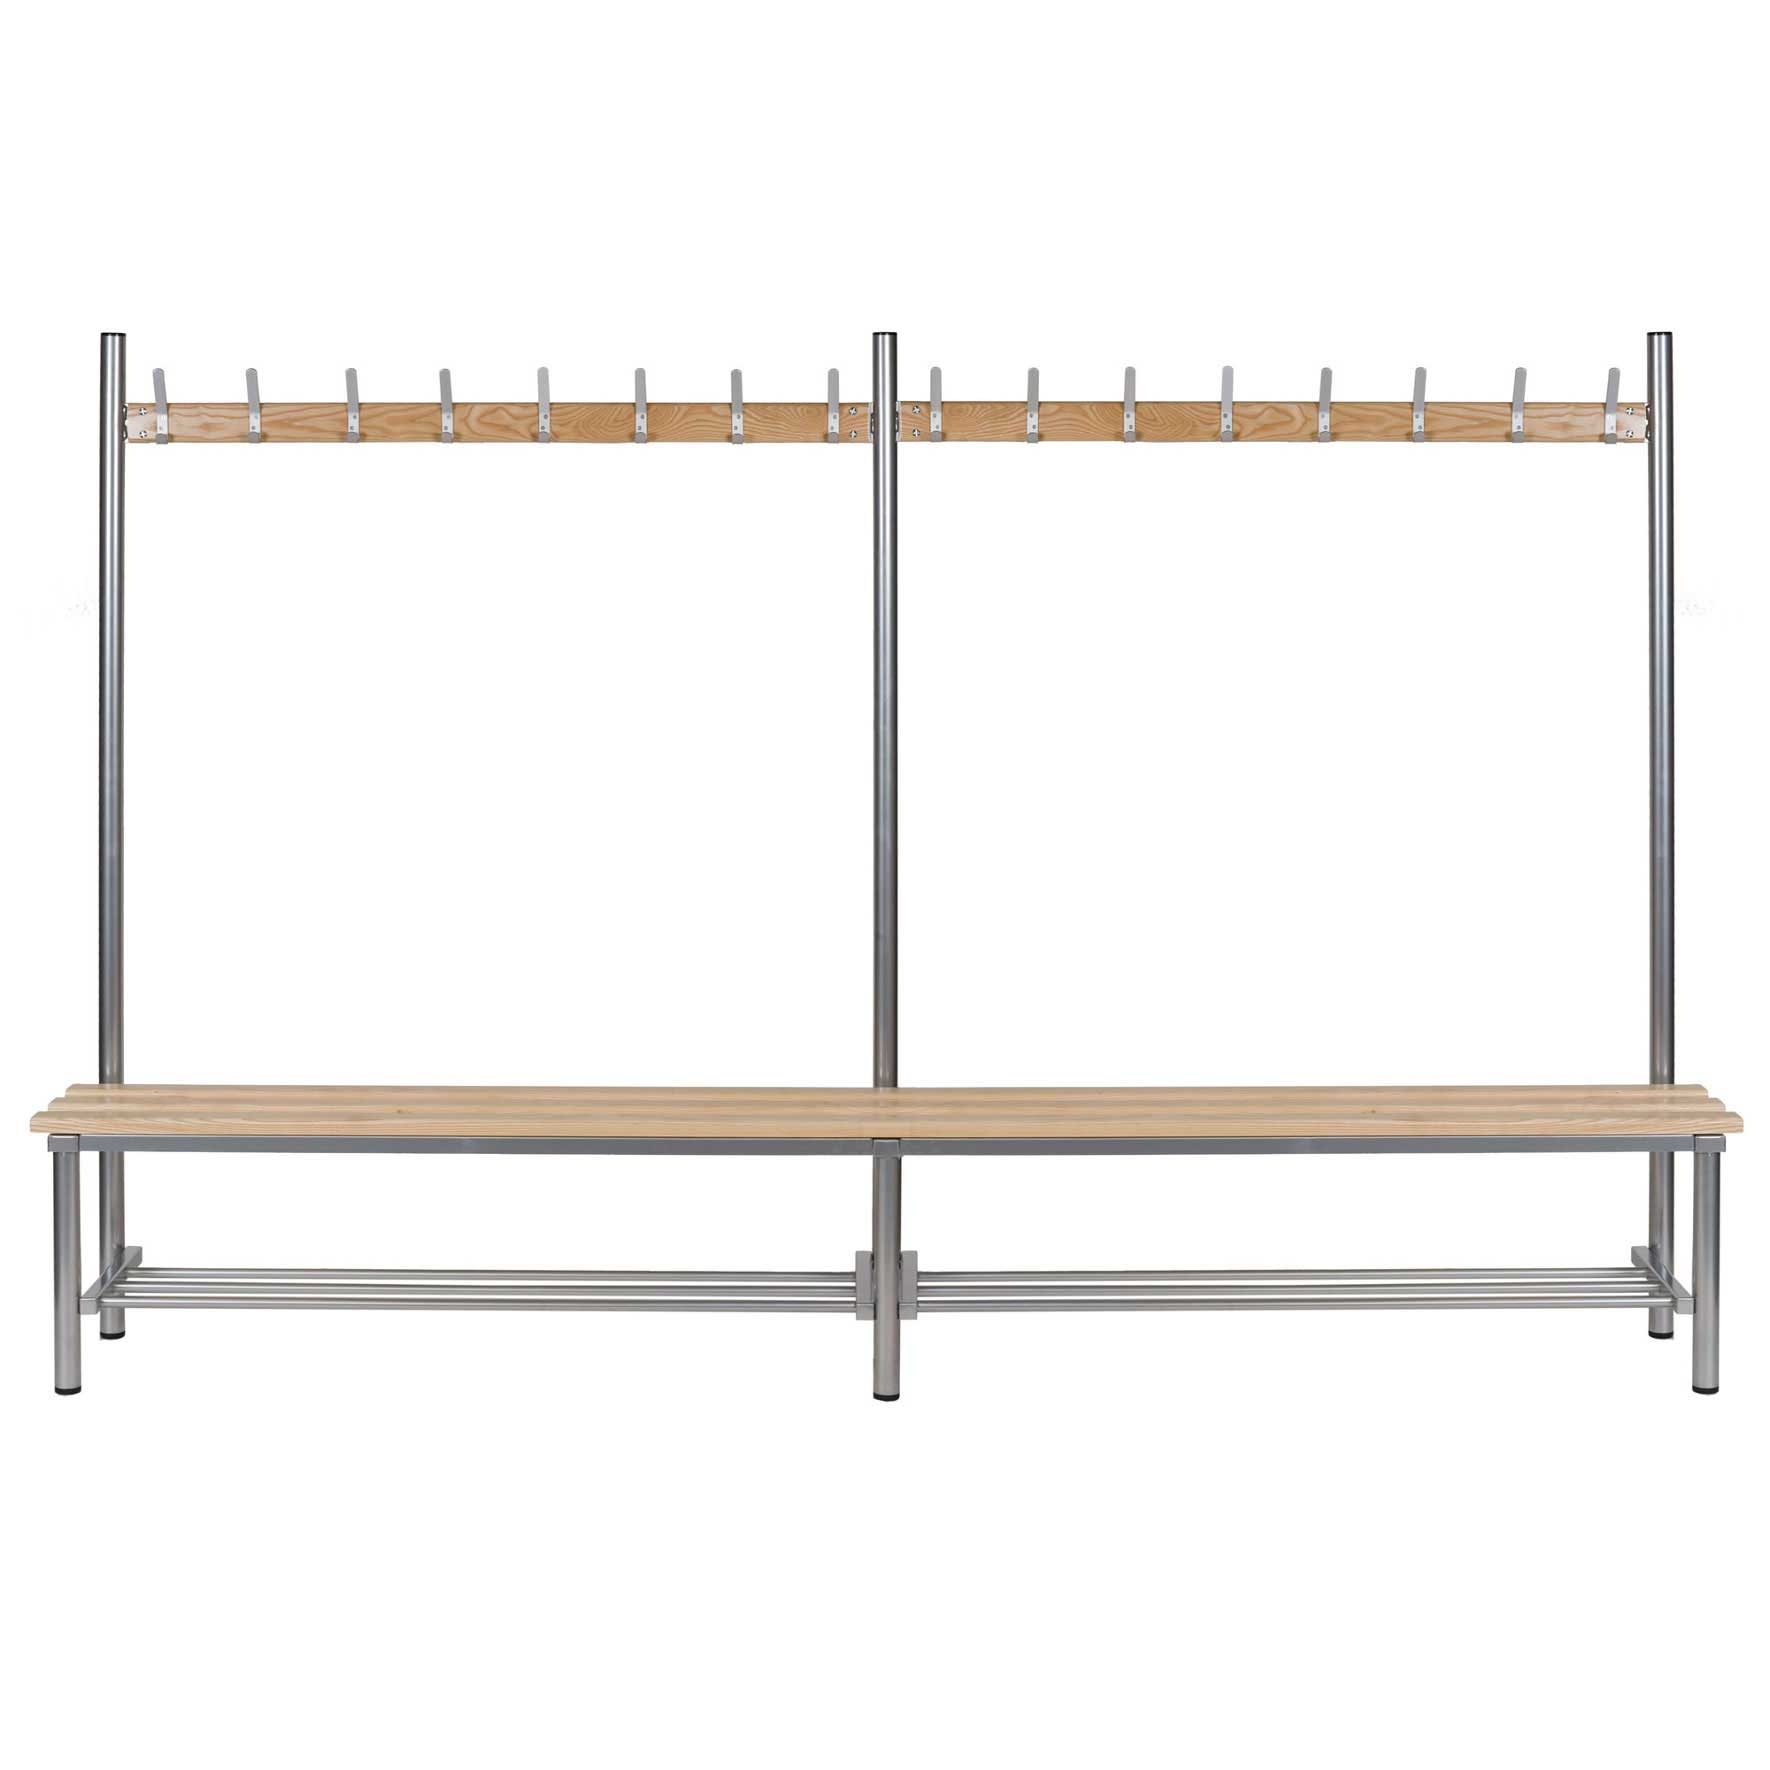 3m bench with shoe rack